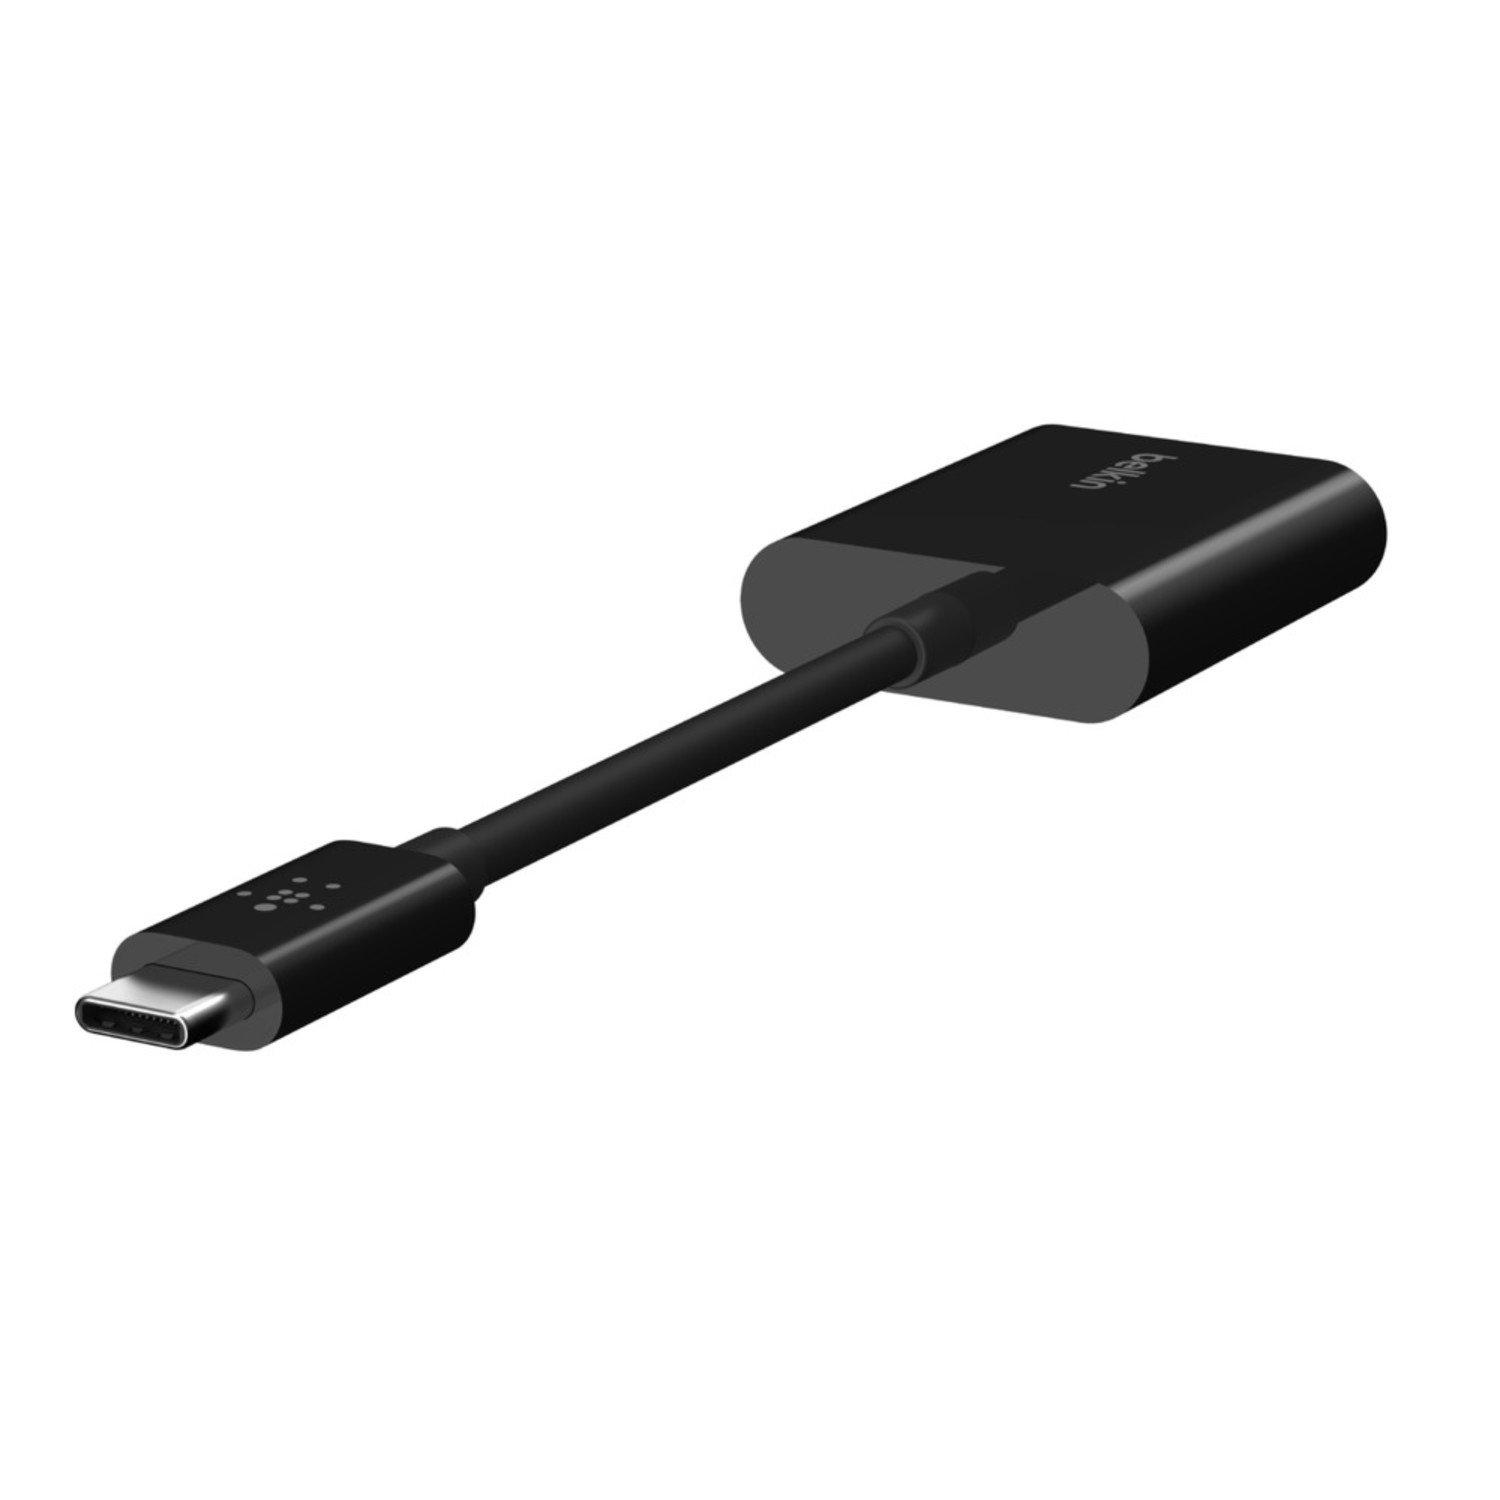 Belkin CONNECT USB-C Audio and Charge Adapter